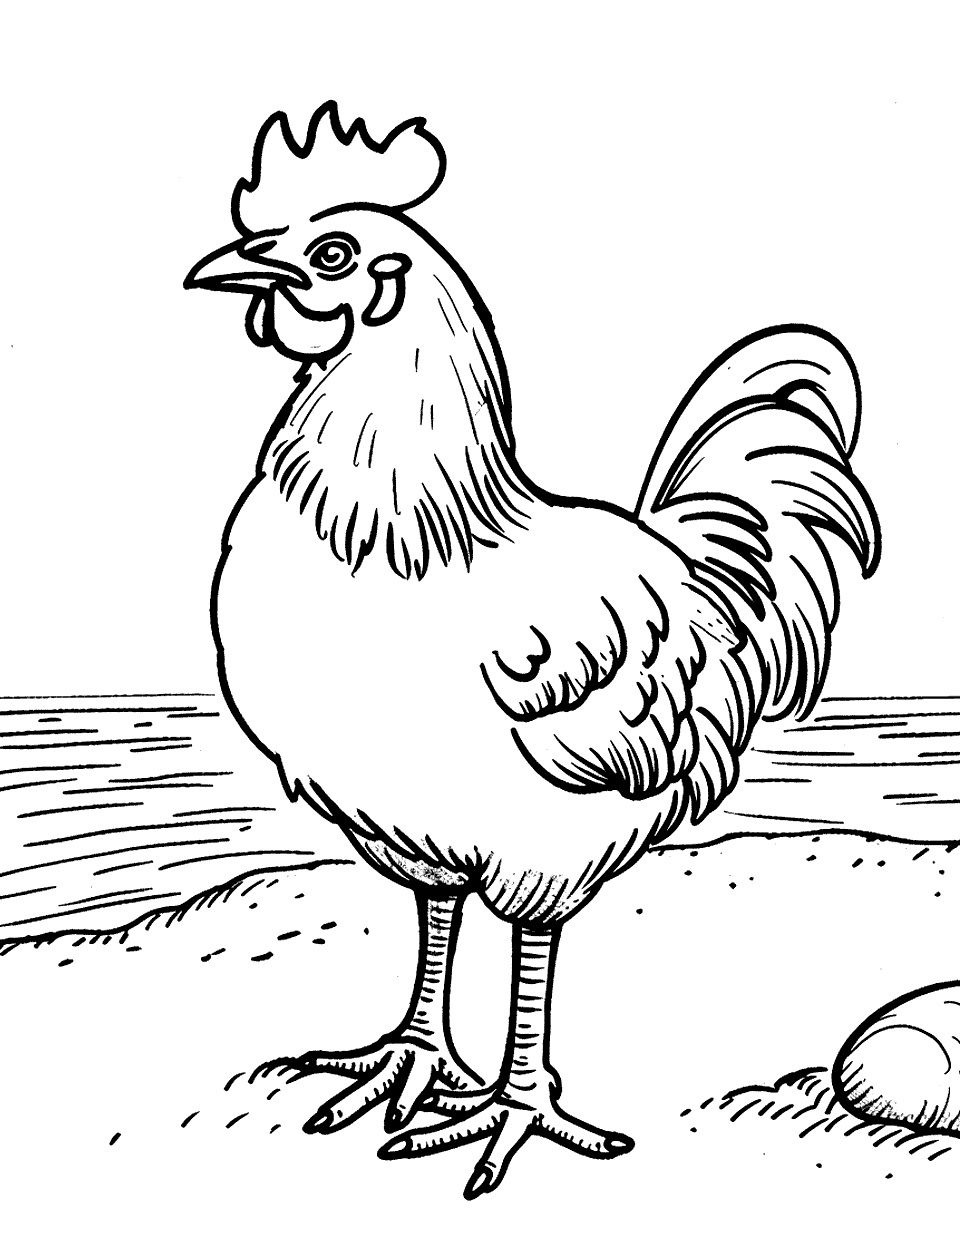 Chicken on the Seabeach Coloring Page - A relaxed chicken enjoying a simple sandy beach.